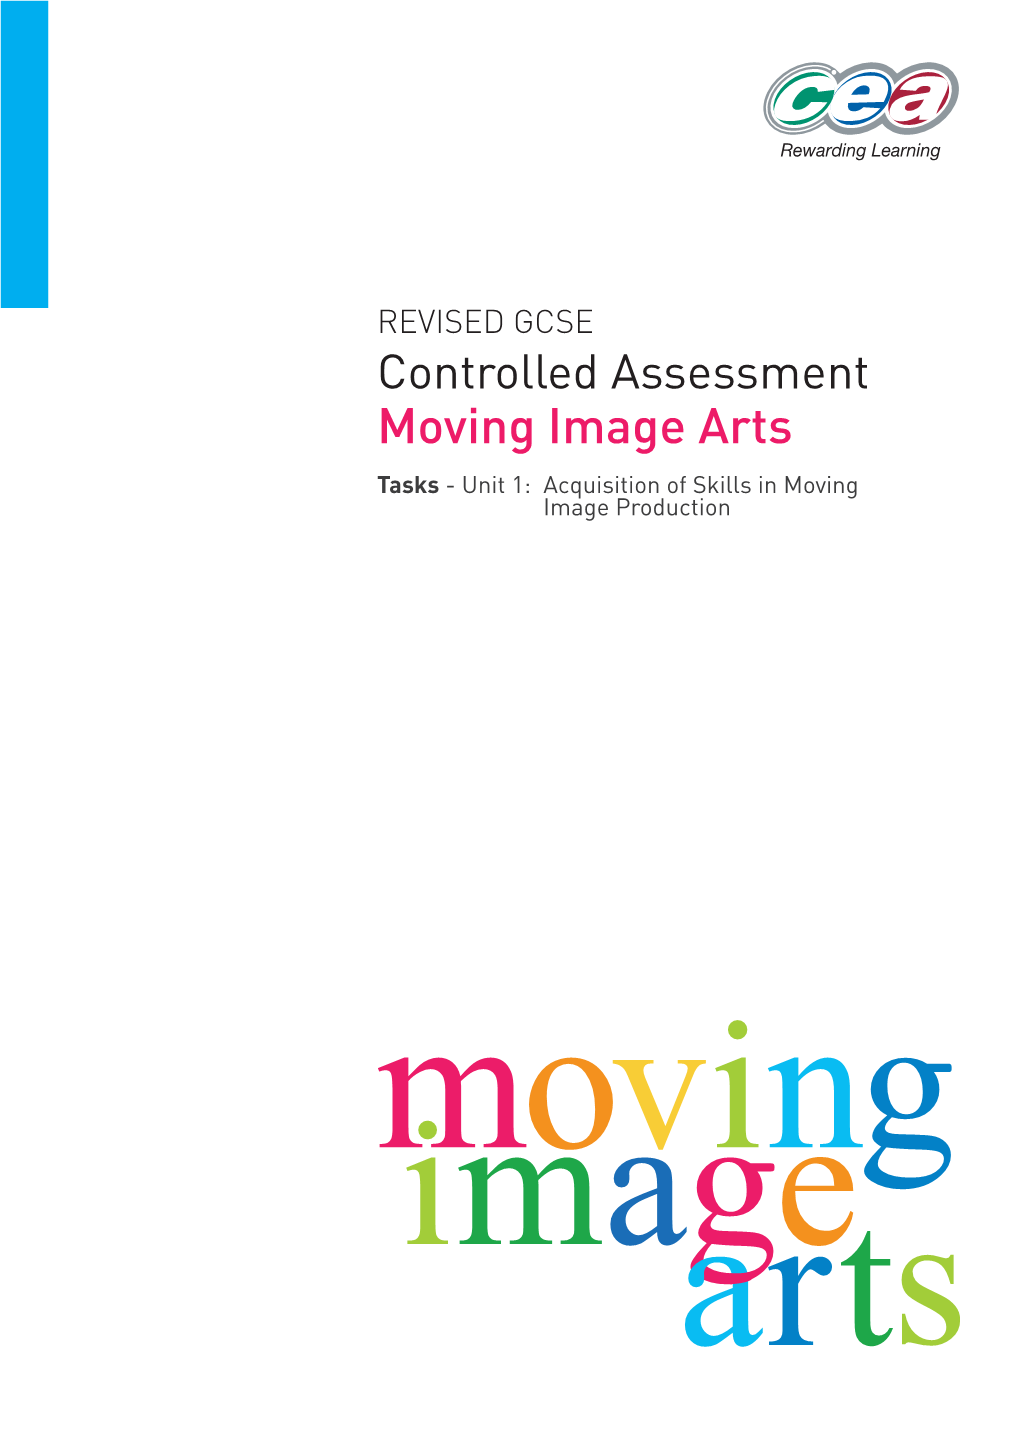 Controlled Assessment Moving Image Arts Tasks - Unit 1: Acquisition of Skills in Moving Image Production